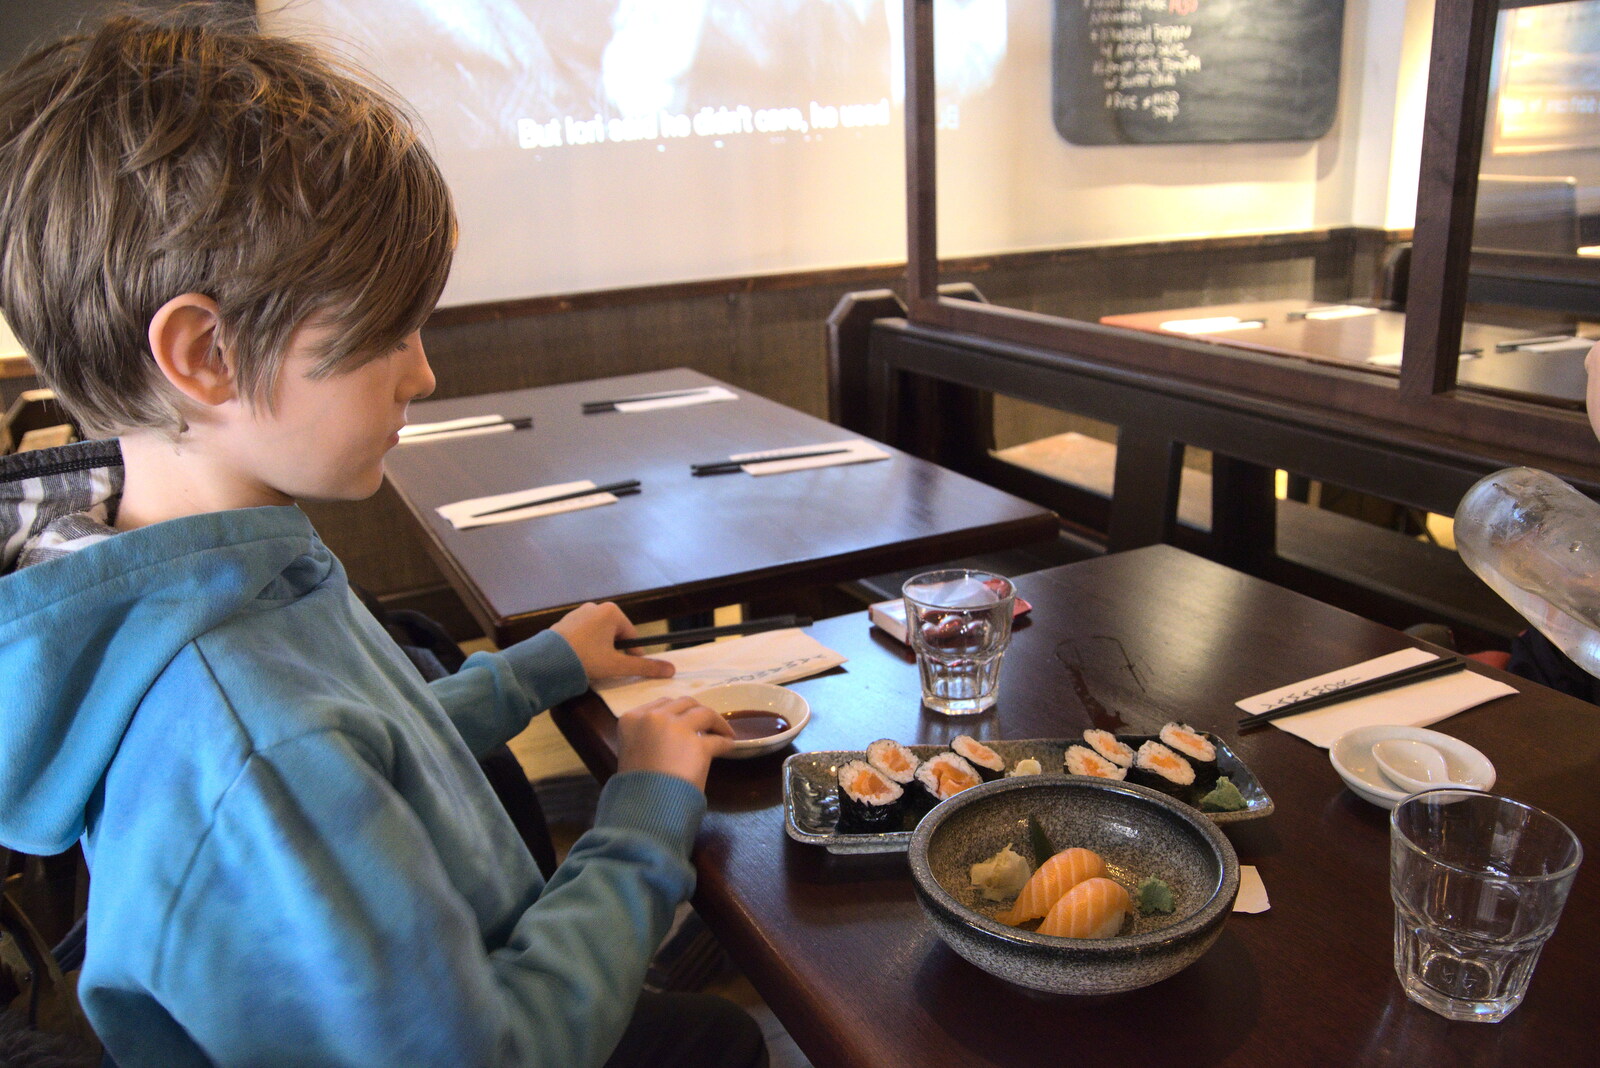 Blackrock North and South, Louth and County Dublin, Ireland - 23rd April 2022: Harry eats salmon sushi in Yamamori